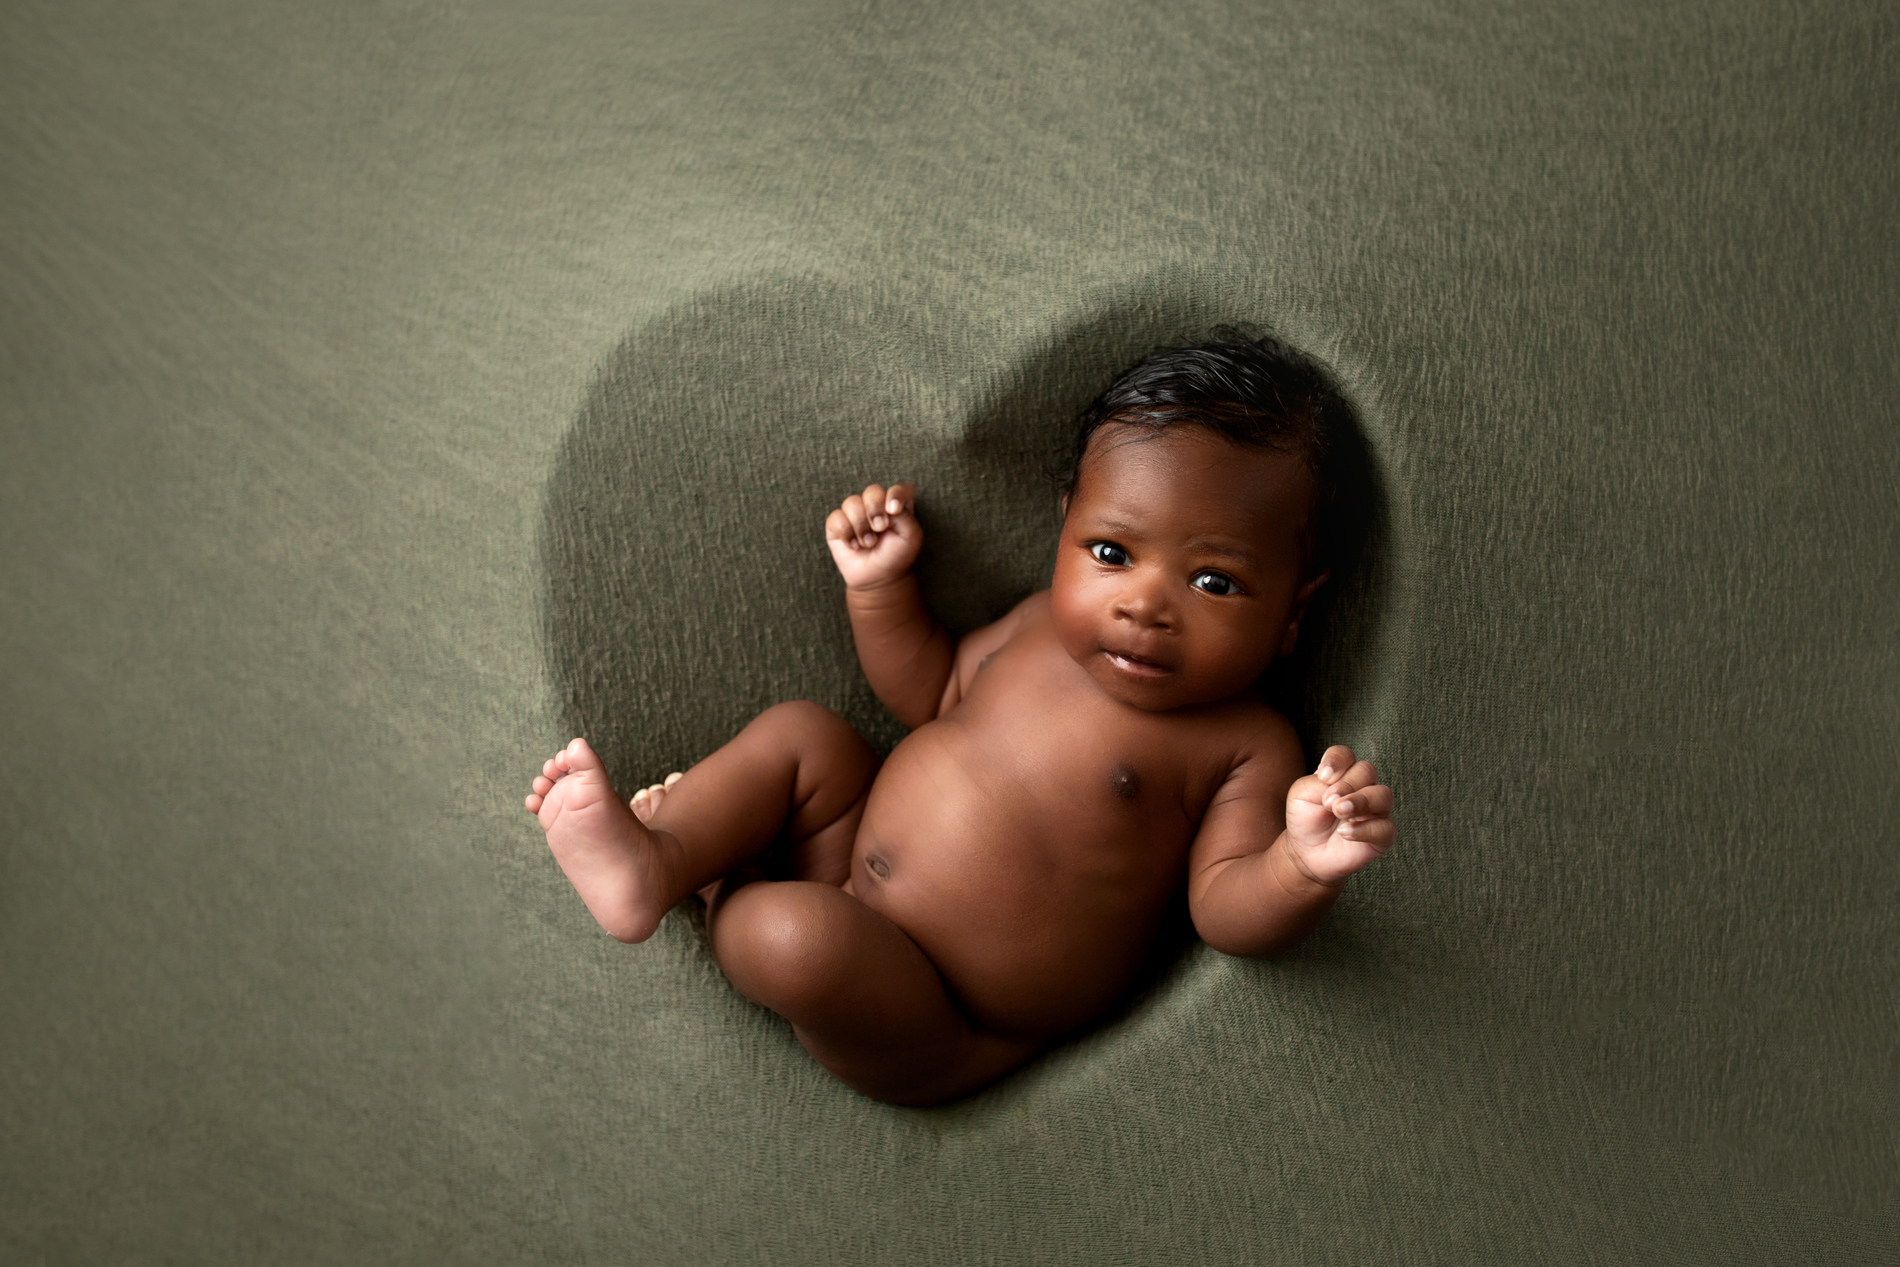 Newborn Photographer, a baby is wide-eyed and cosy on bedsheets, there is an impression of a heart beneath baby